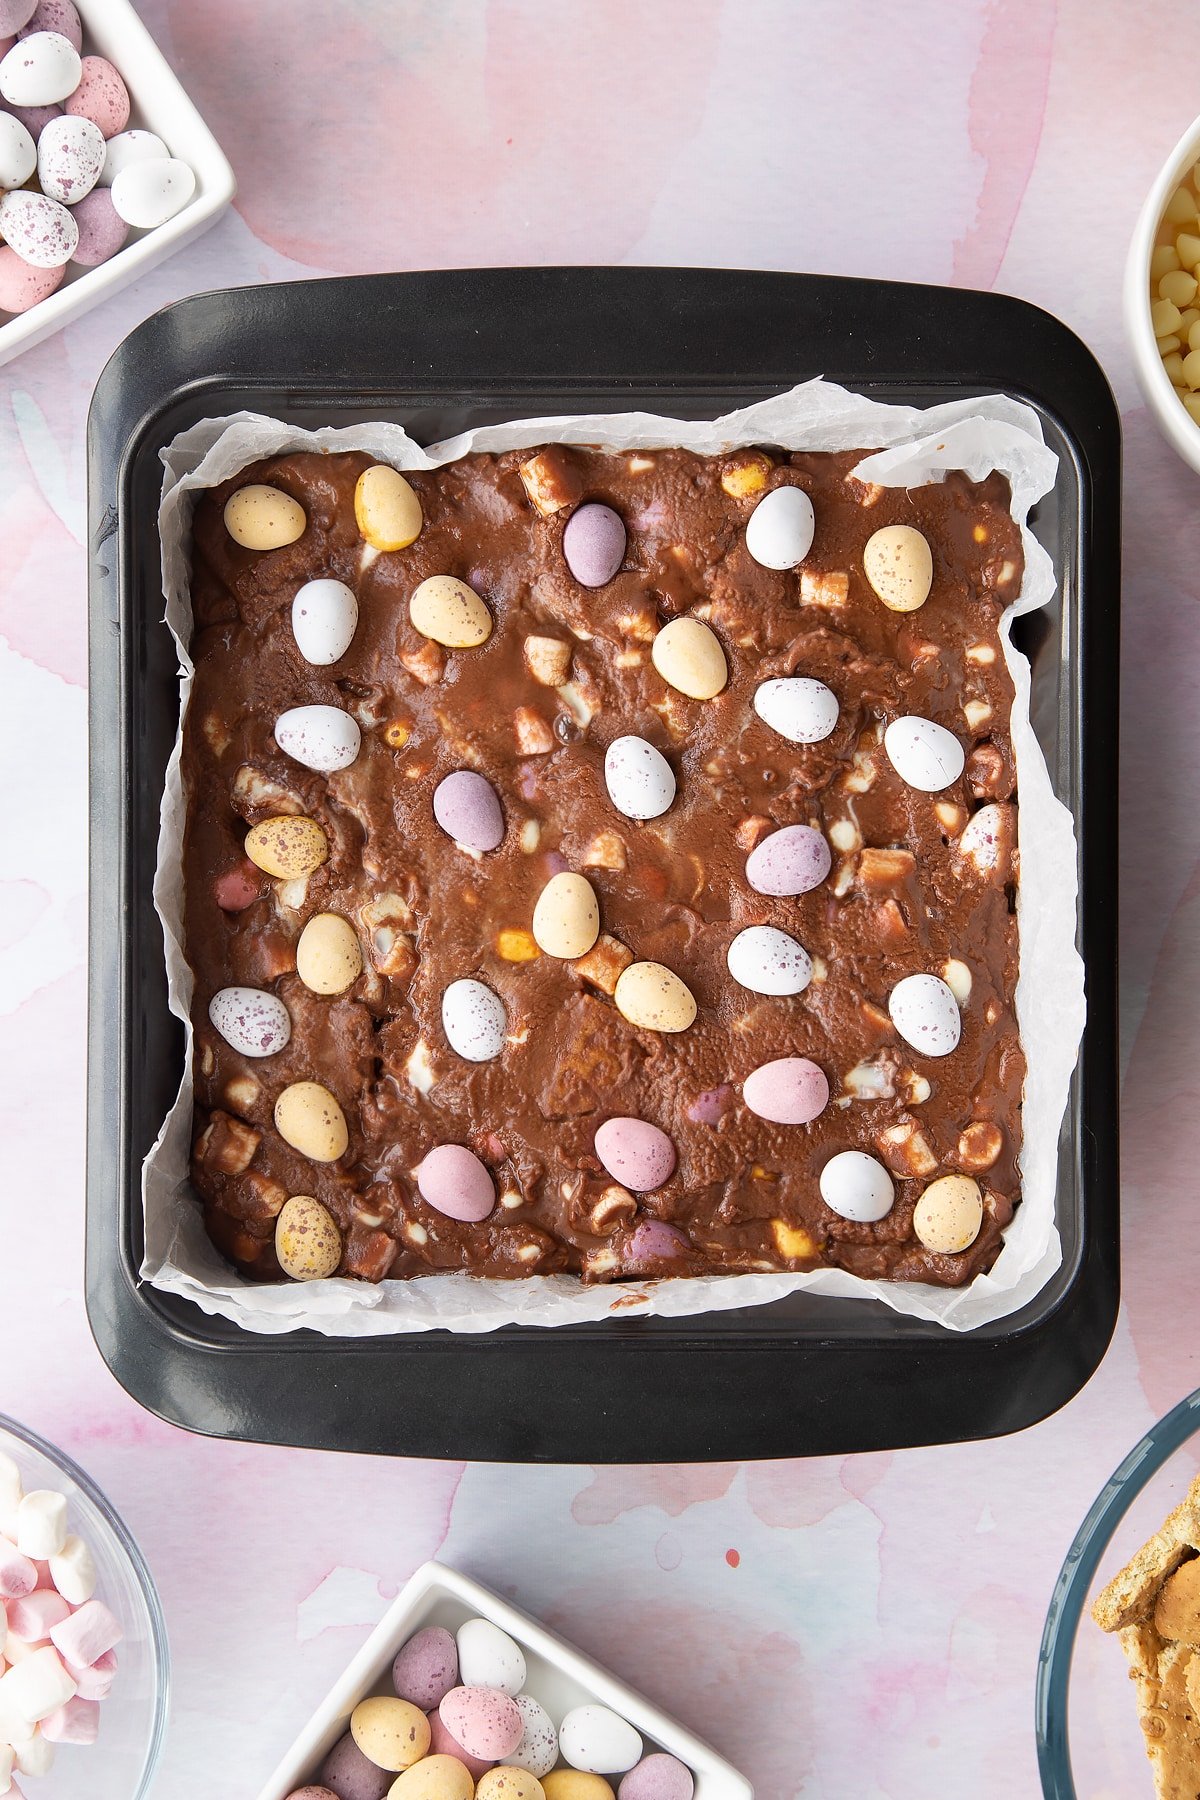 Rocky road mix levelled off in a tray and topped with Mini Eggs. Ingredients to make Mini Egg rocky road surrounds the tray.